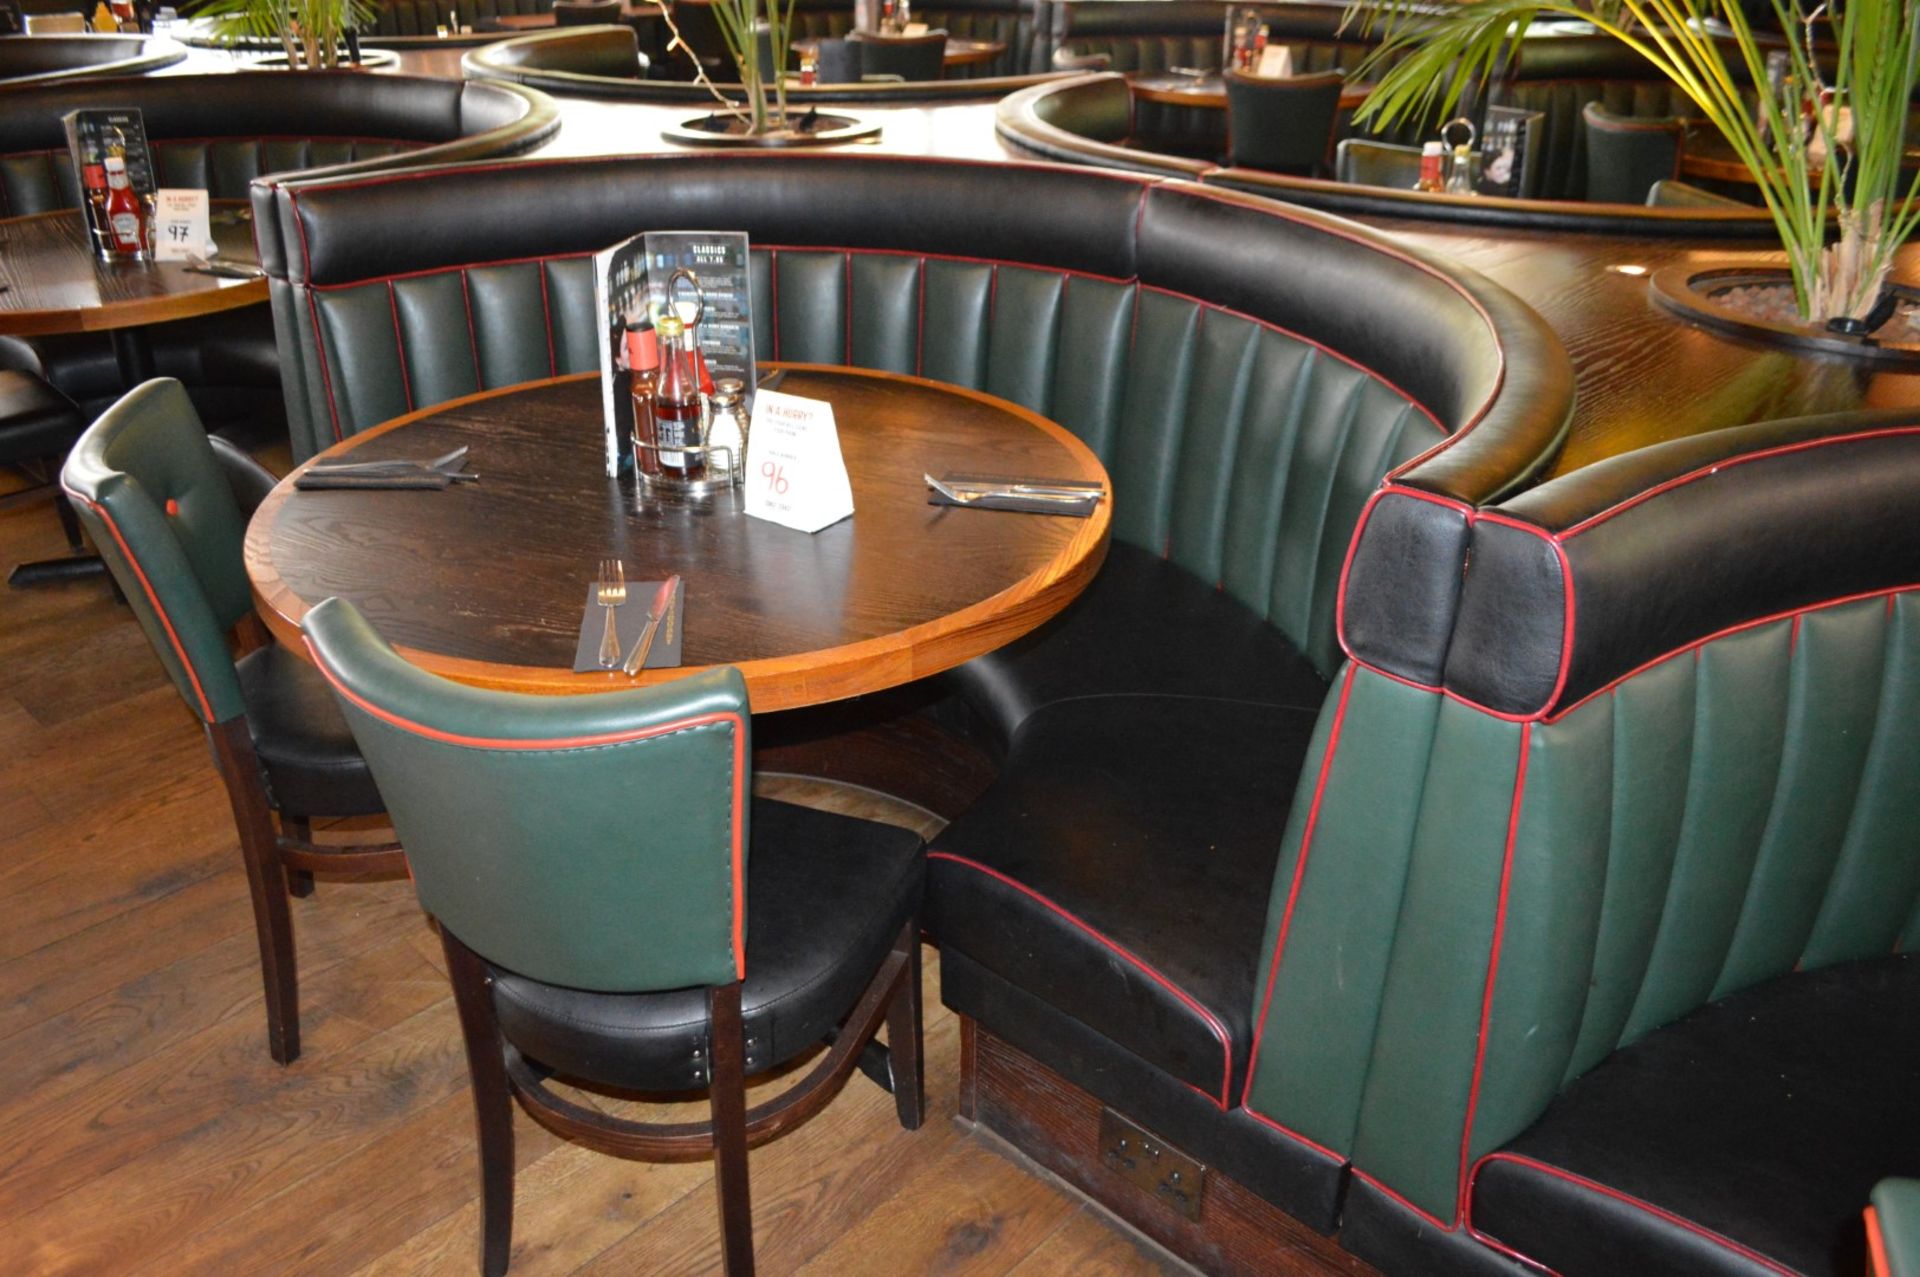 8 x Contemporary Half Circle Seating Booths Waitress Point and Wood Paneling - Features a Leather - Image 9 of 17